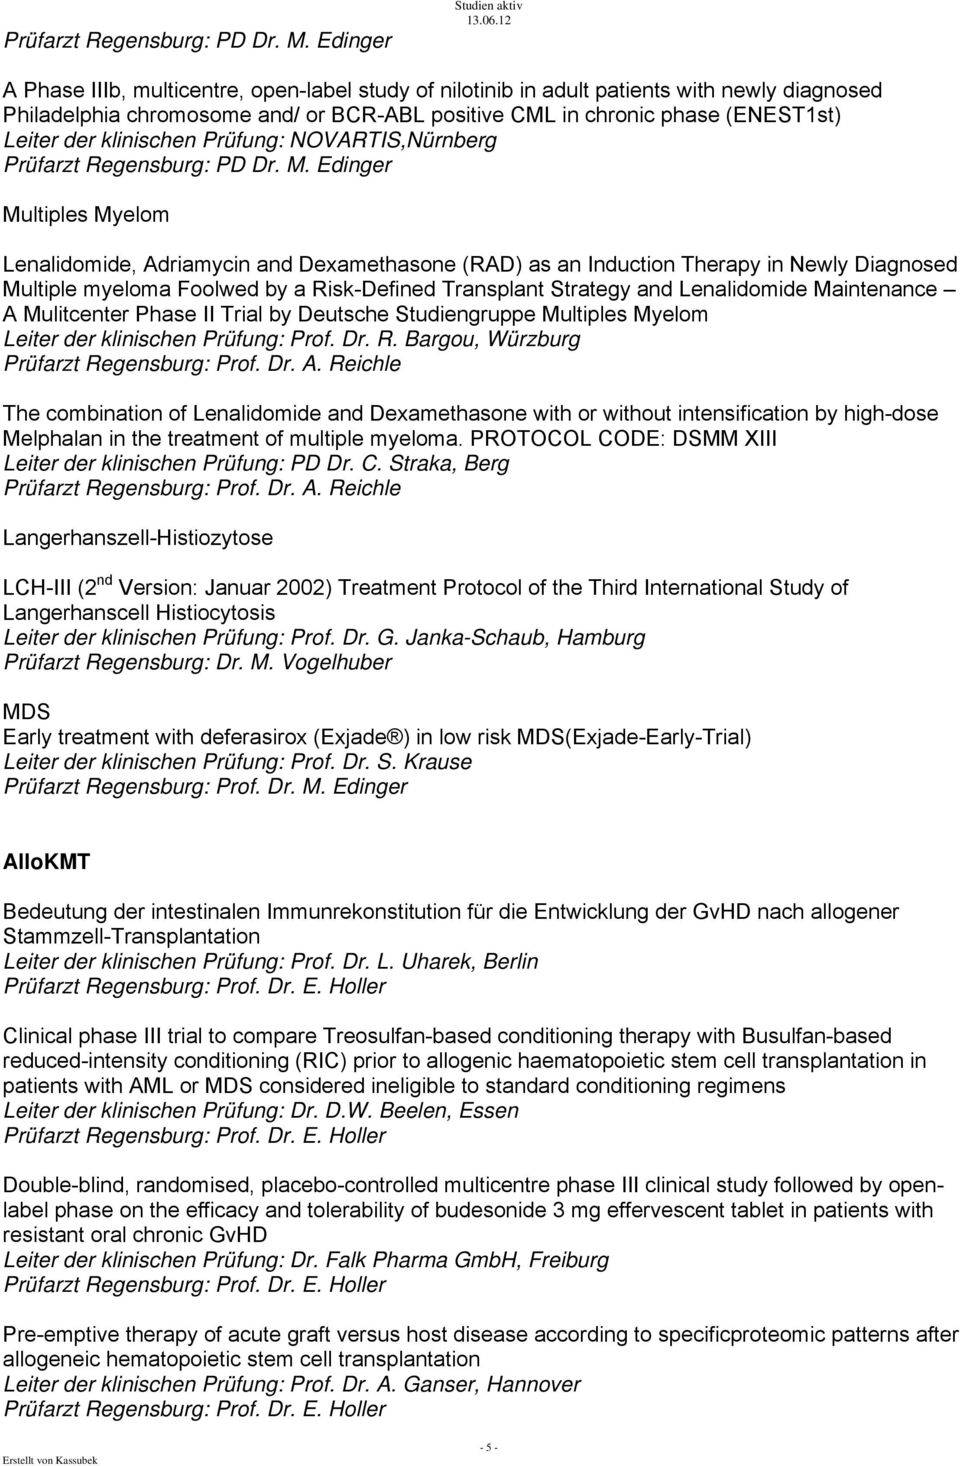 Leiter der klinischen Prüfung: NOVARTIS,Nürnberg  Edinger Multiples Myelom Lenalidomide, Adriamycin and Dexamethasone (RAD) as an Induction Therapy in Newly Diagnosed Multiple myeloma Foolwed by a